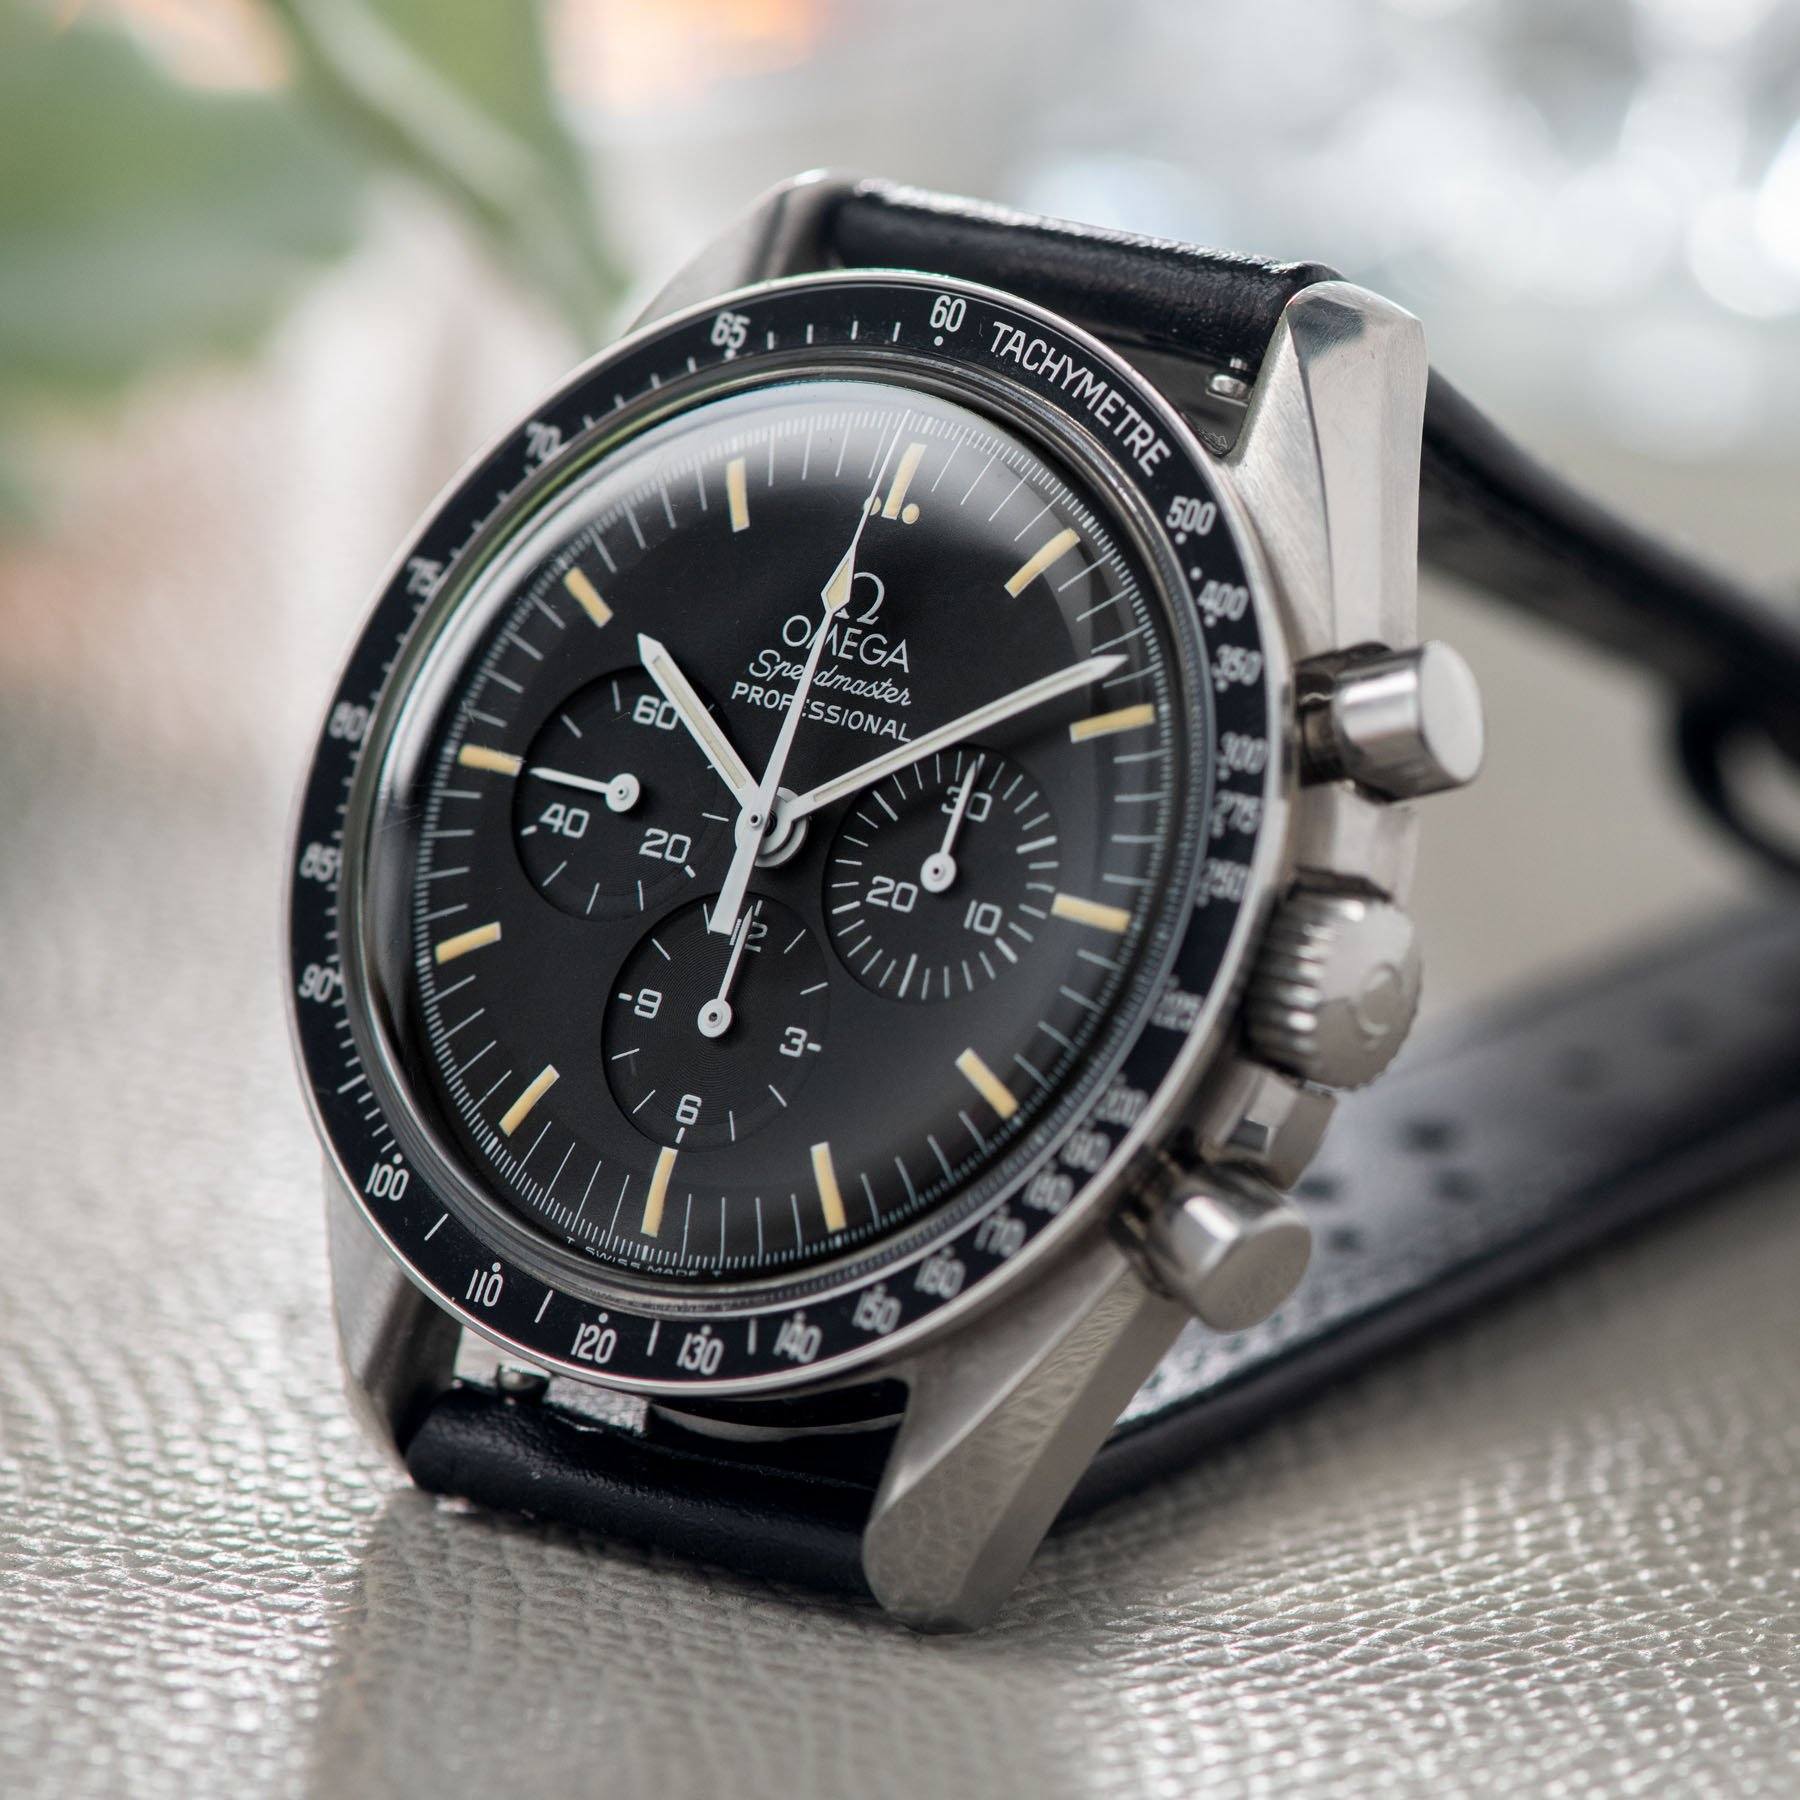 Omega Speedmaster Professional ST 145.022  Dating to 1984